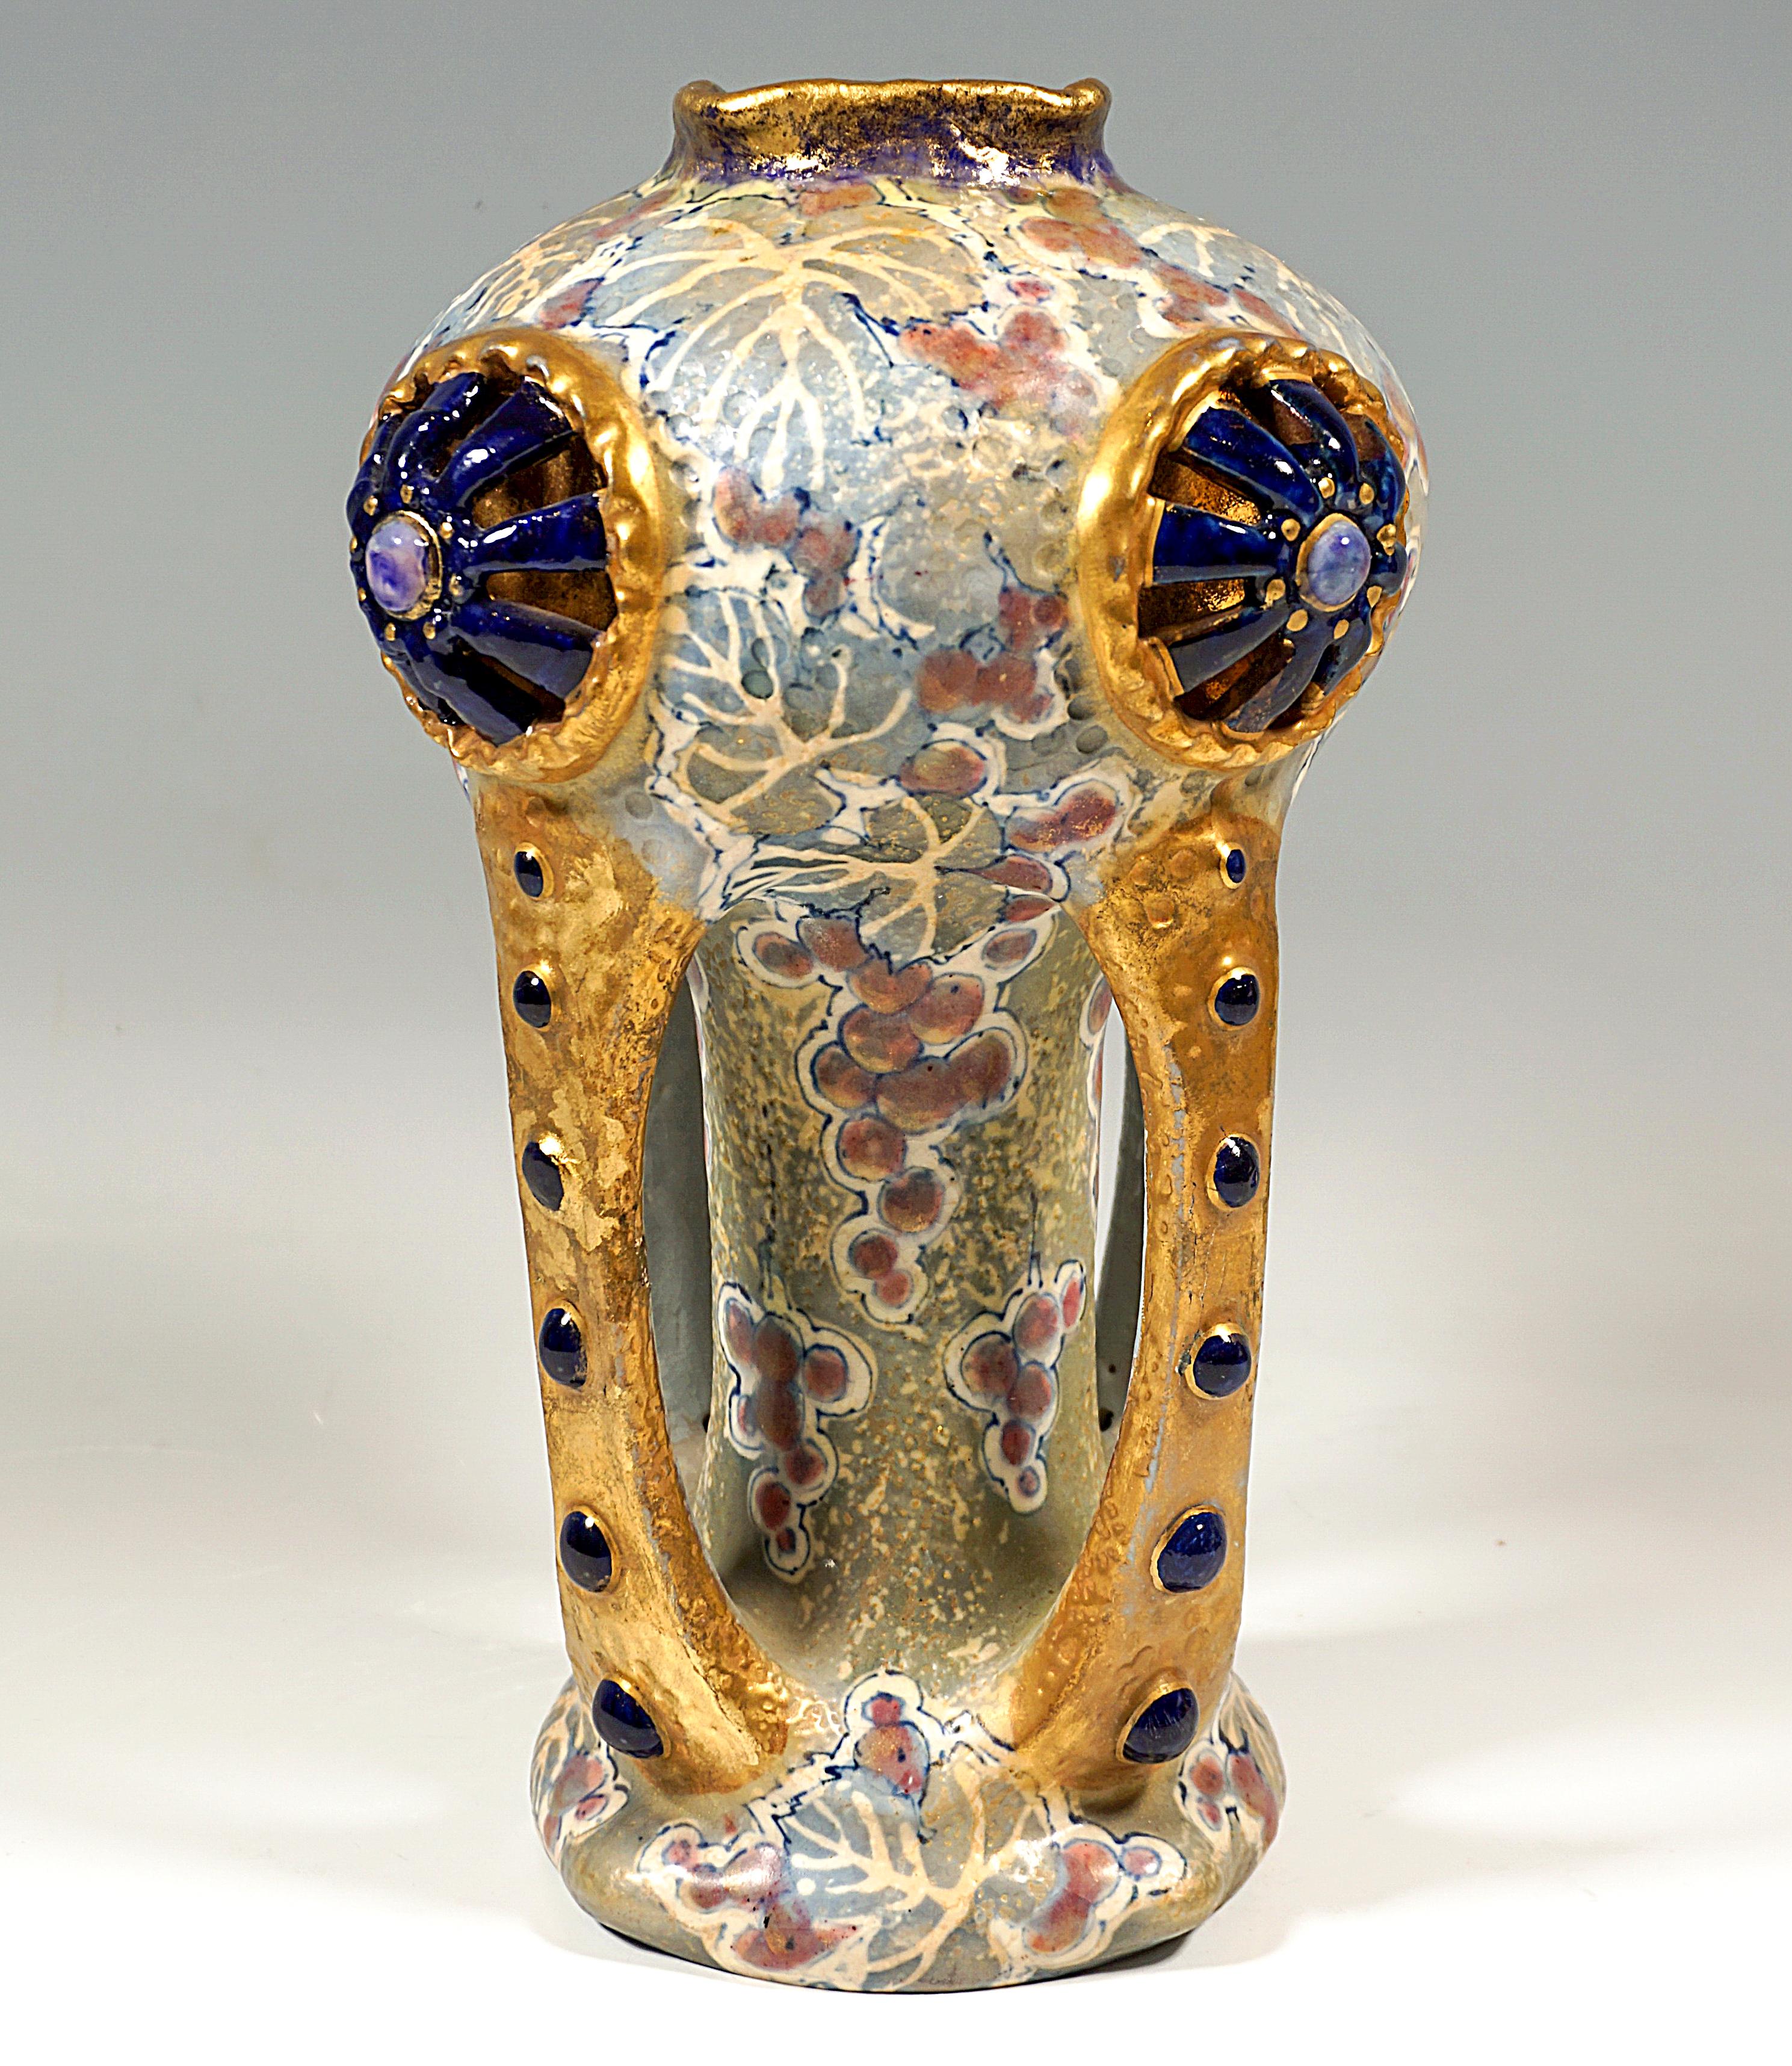 Excellent Art Nouveau Ceramic Piece:
Ceramic vase on a flush, flared, round foot with a slender neck and a large, bulbous head part with a small attached square opening, four bars emanating from the foot and connected to the head part enclose and